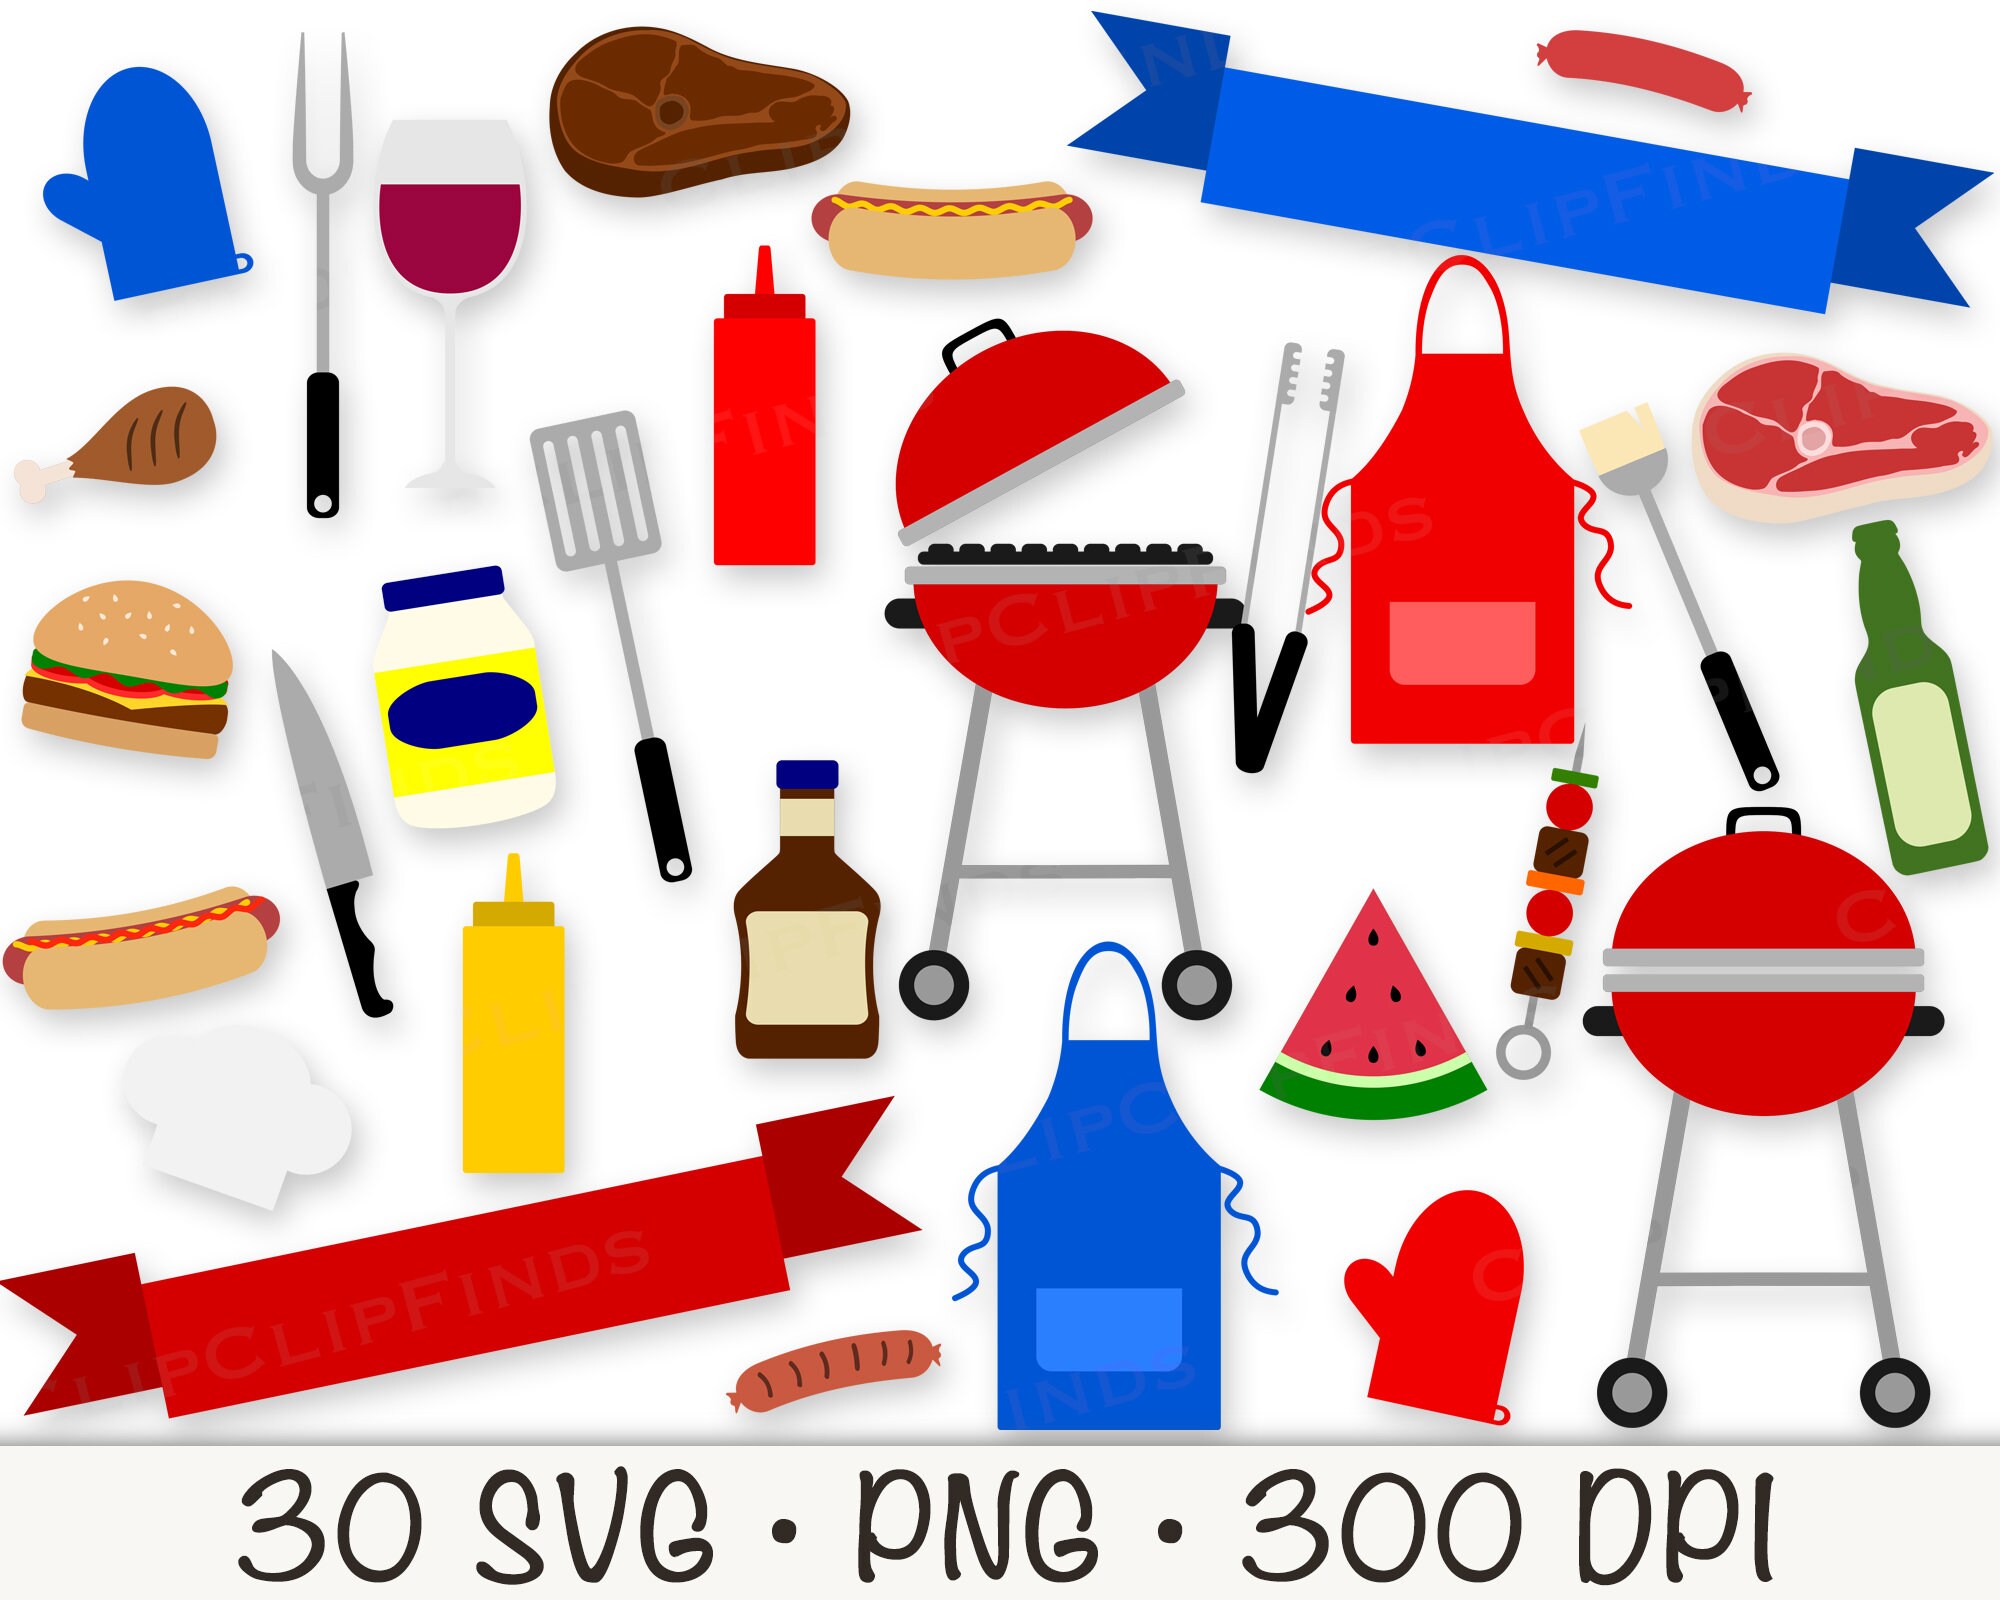 BBQ Utensils SVG Barbecue Tools Silhouette Cookout Clipart 